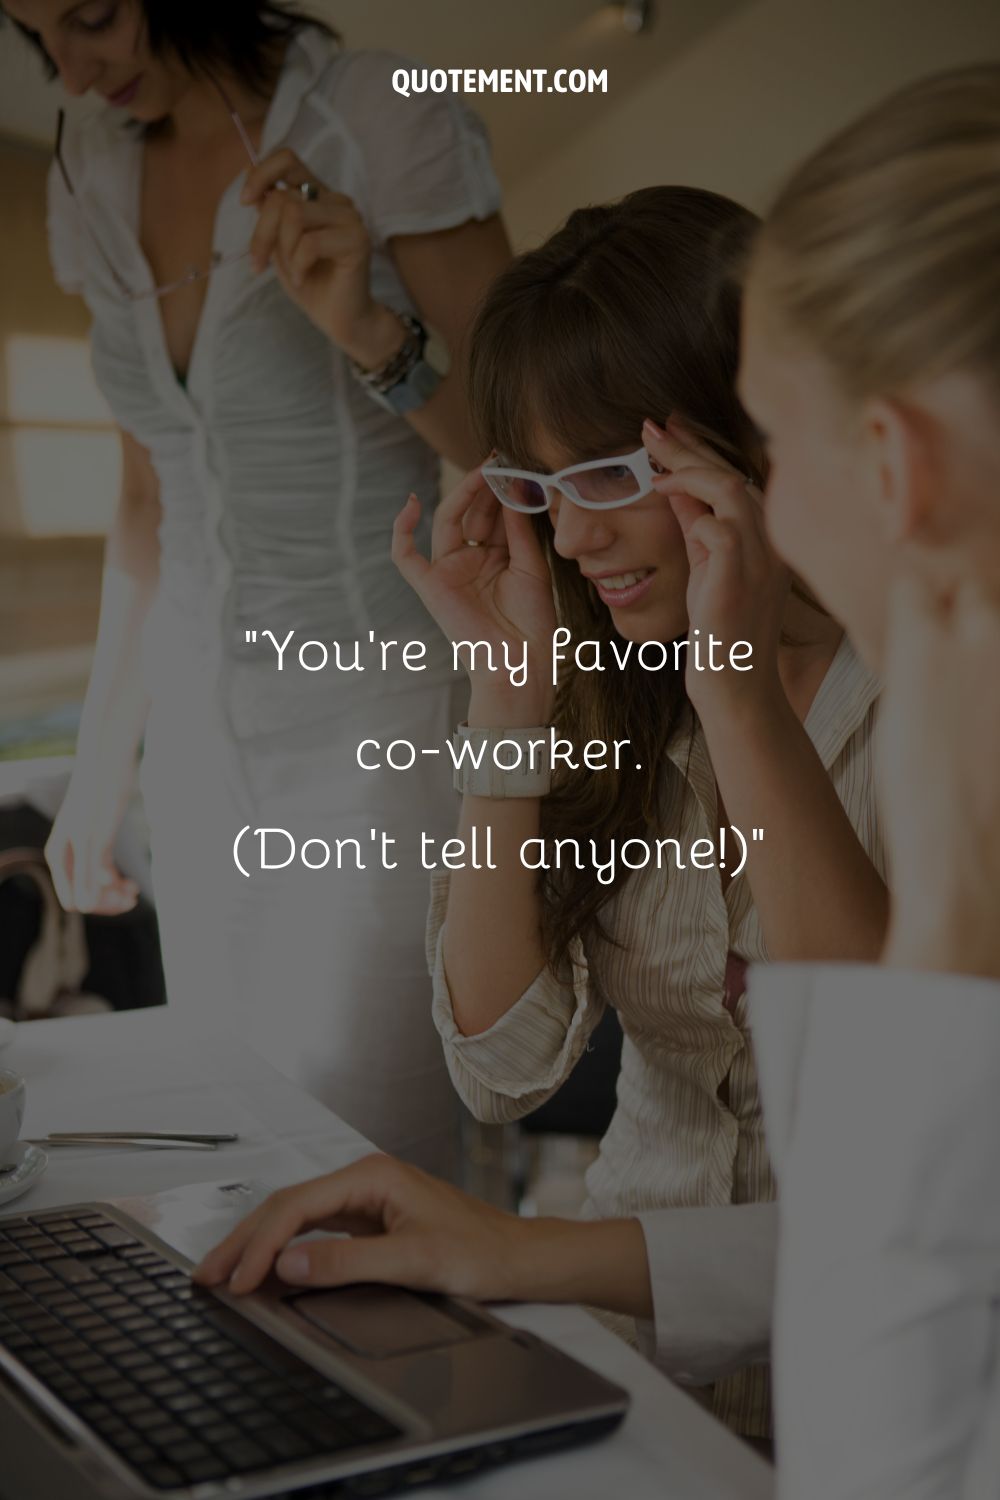 three girls working at an office representing coworker friend quote